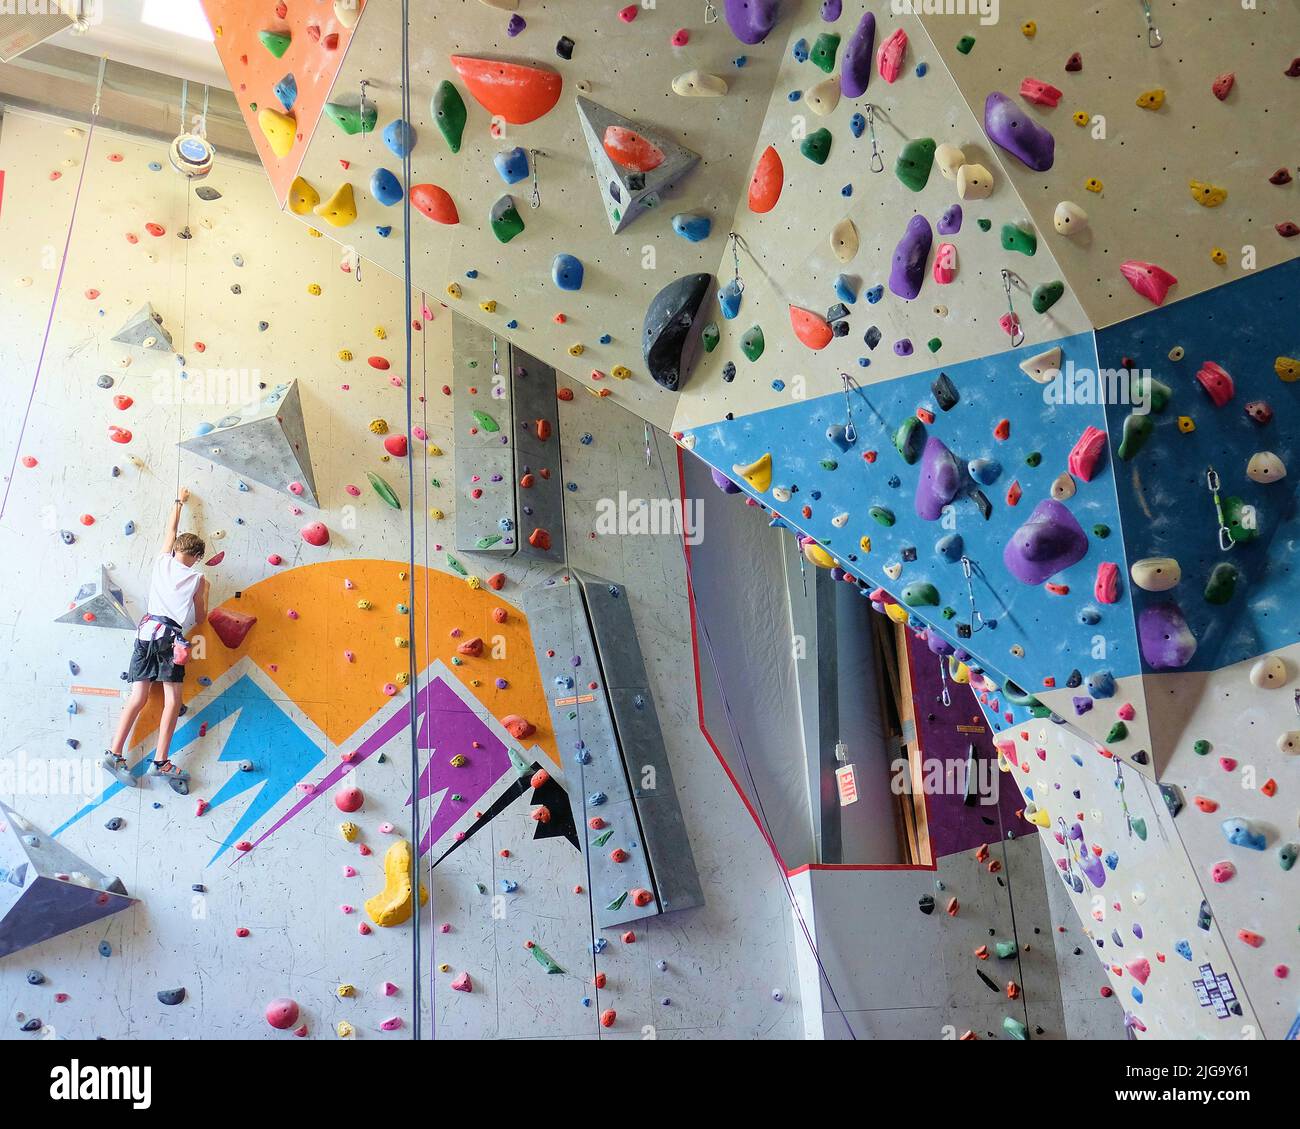 Young teenager climbing on an Indoor rock climbing wall seen from below; ropes and climbing holds for support on the ascent. Stock Photo